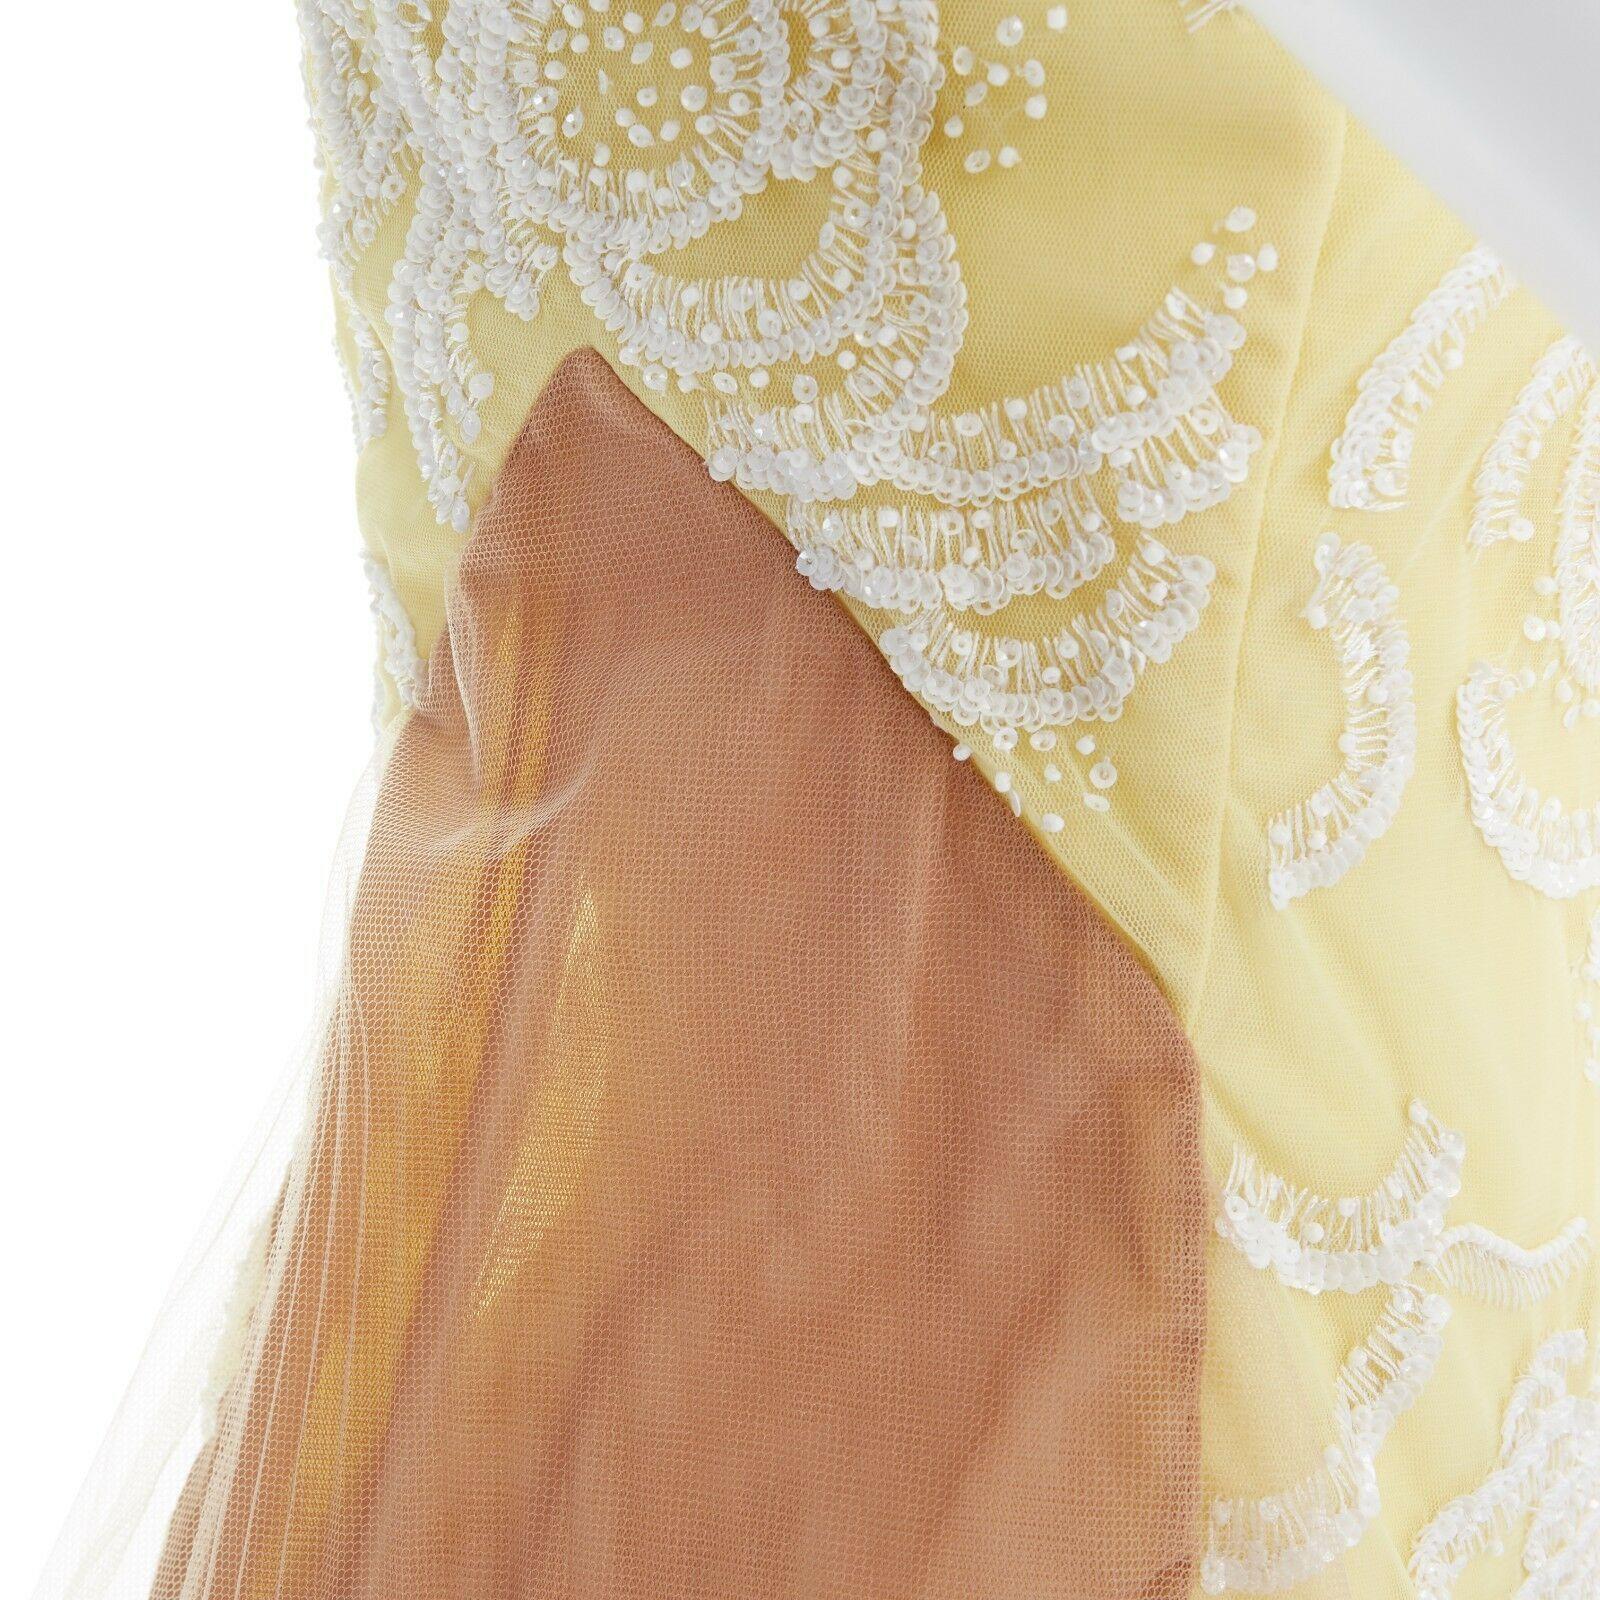 runway CHRISTOPHER KANE SS10 yellow sequins lace nude tulle insert dress UK6 XS 3